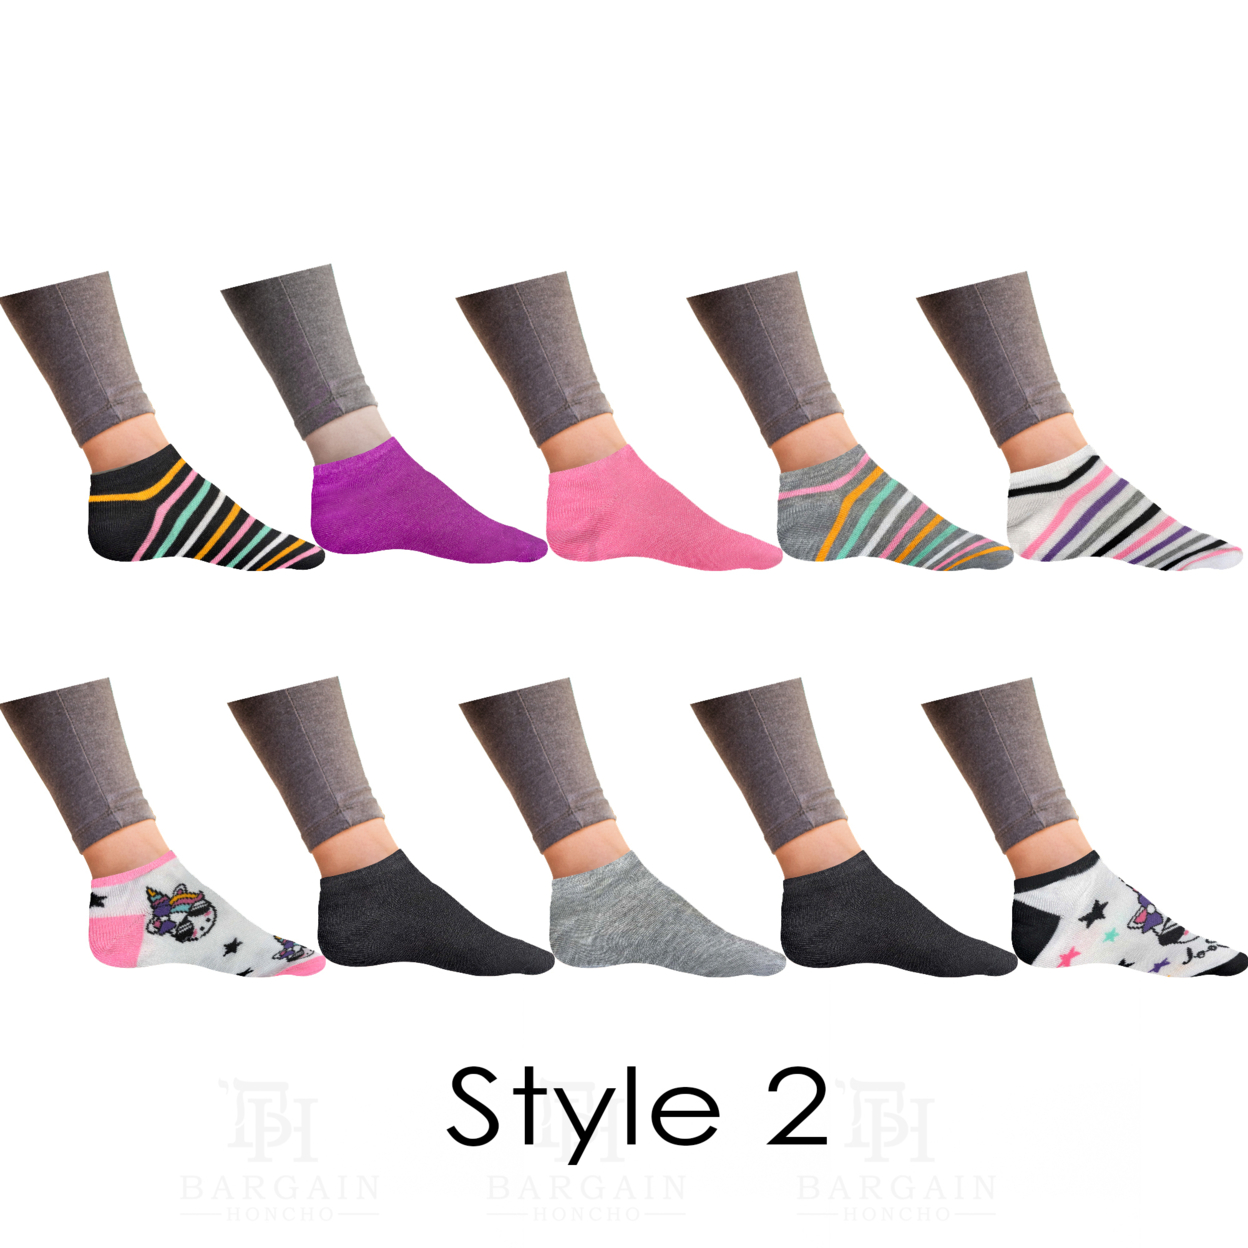 20-Pairs: Women’s Breathable Colorful Fun No Show Low Cut Ankle Socks - 2 & 6